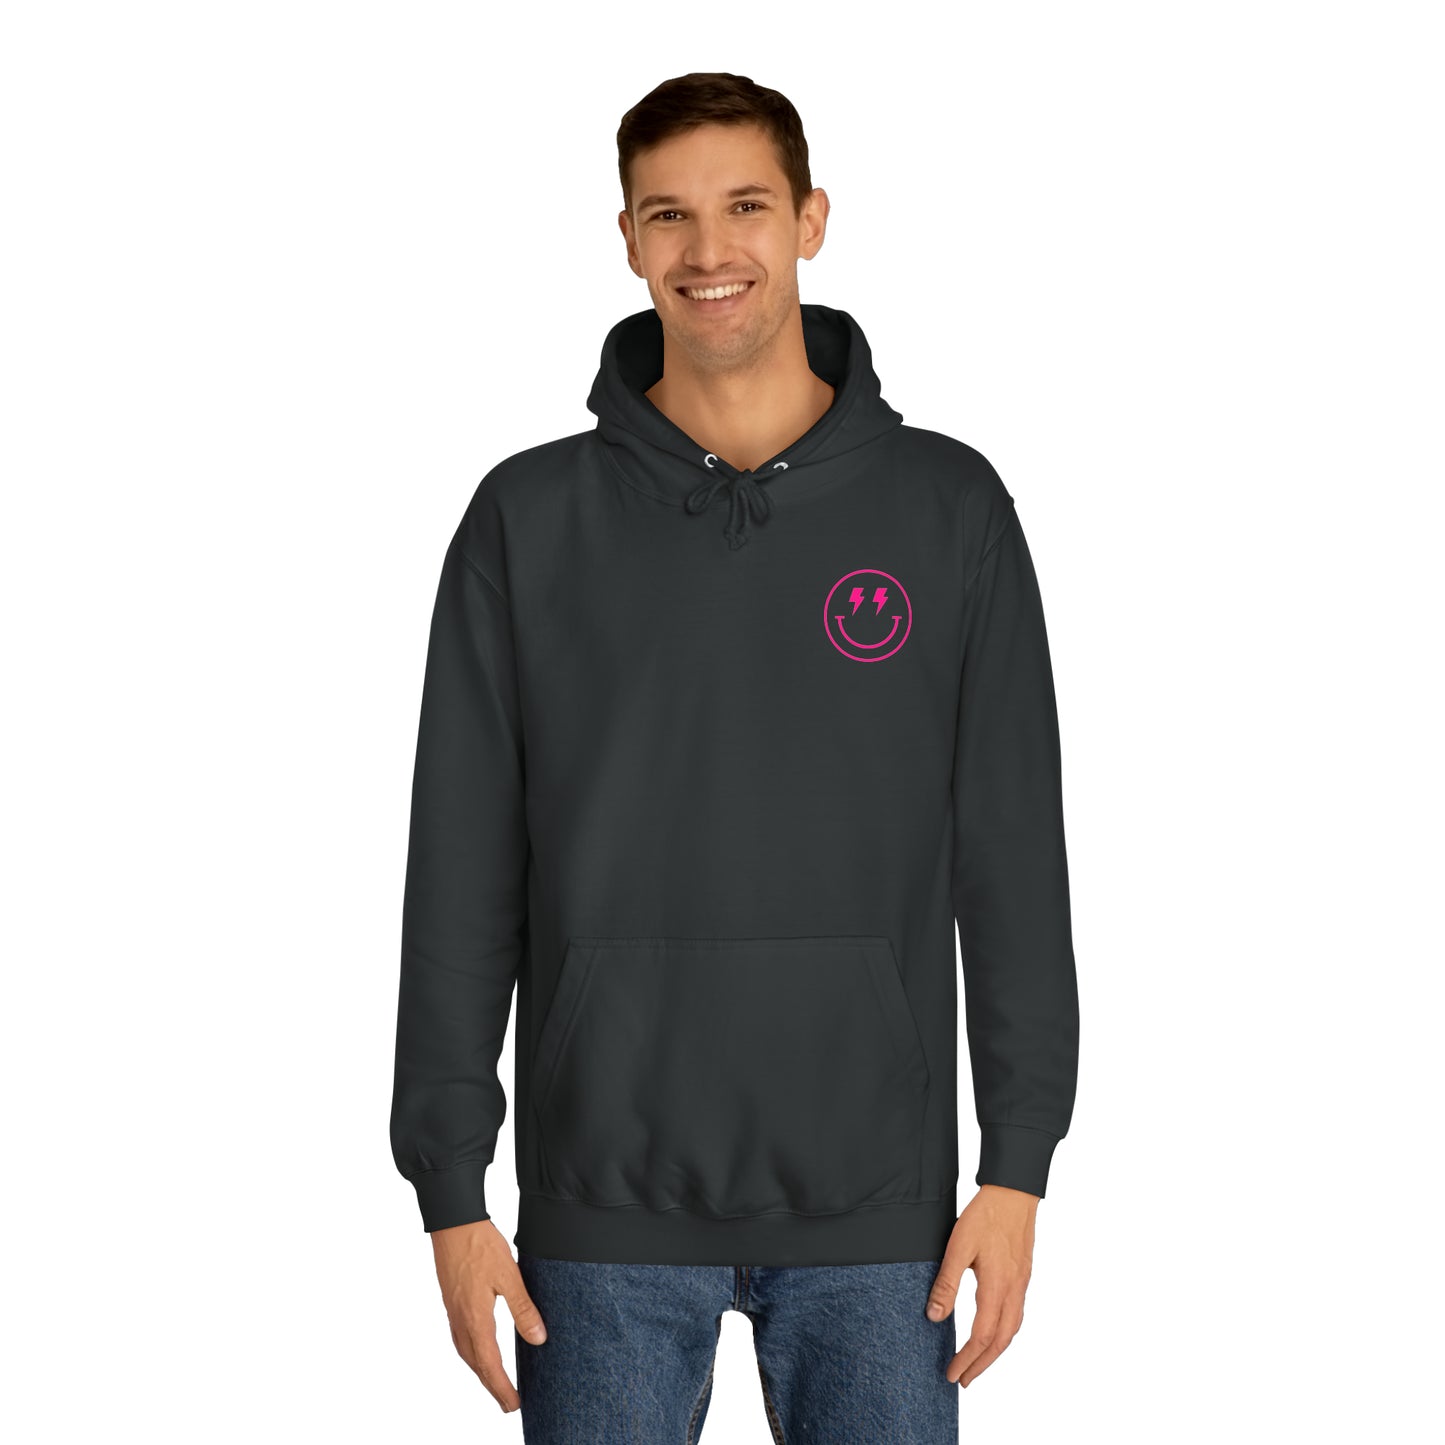 Lightening Bolt Design Hoodie: Unleash Your Style with Comfort and Quality